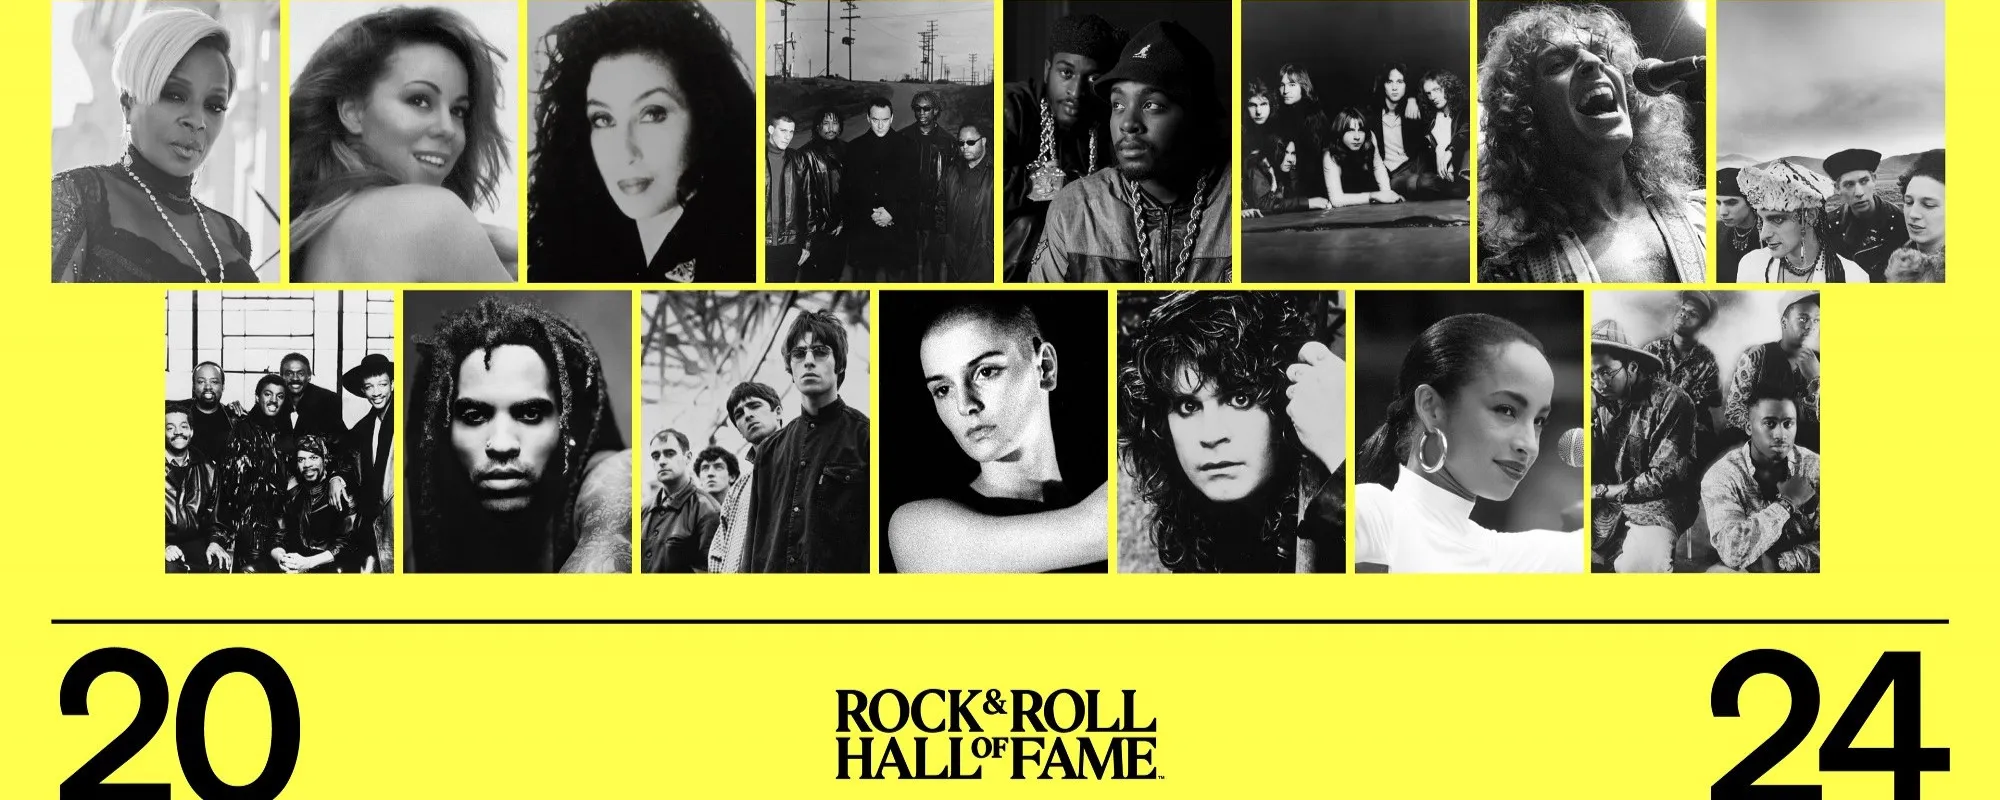 Dave Matthews Band, Foreigner, Ozzy Osbourne, and Mariah Carey Among 2024 Rock & Roll Hall of Fame Nominees